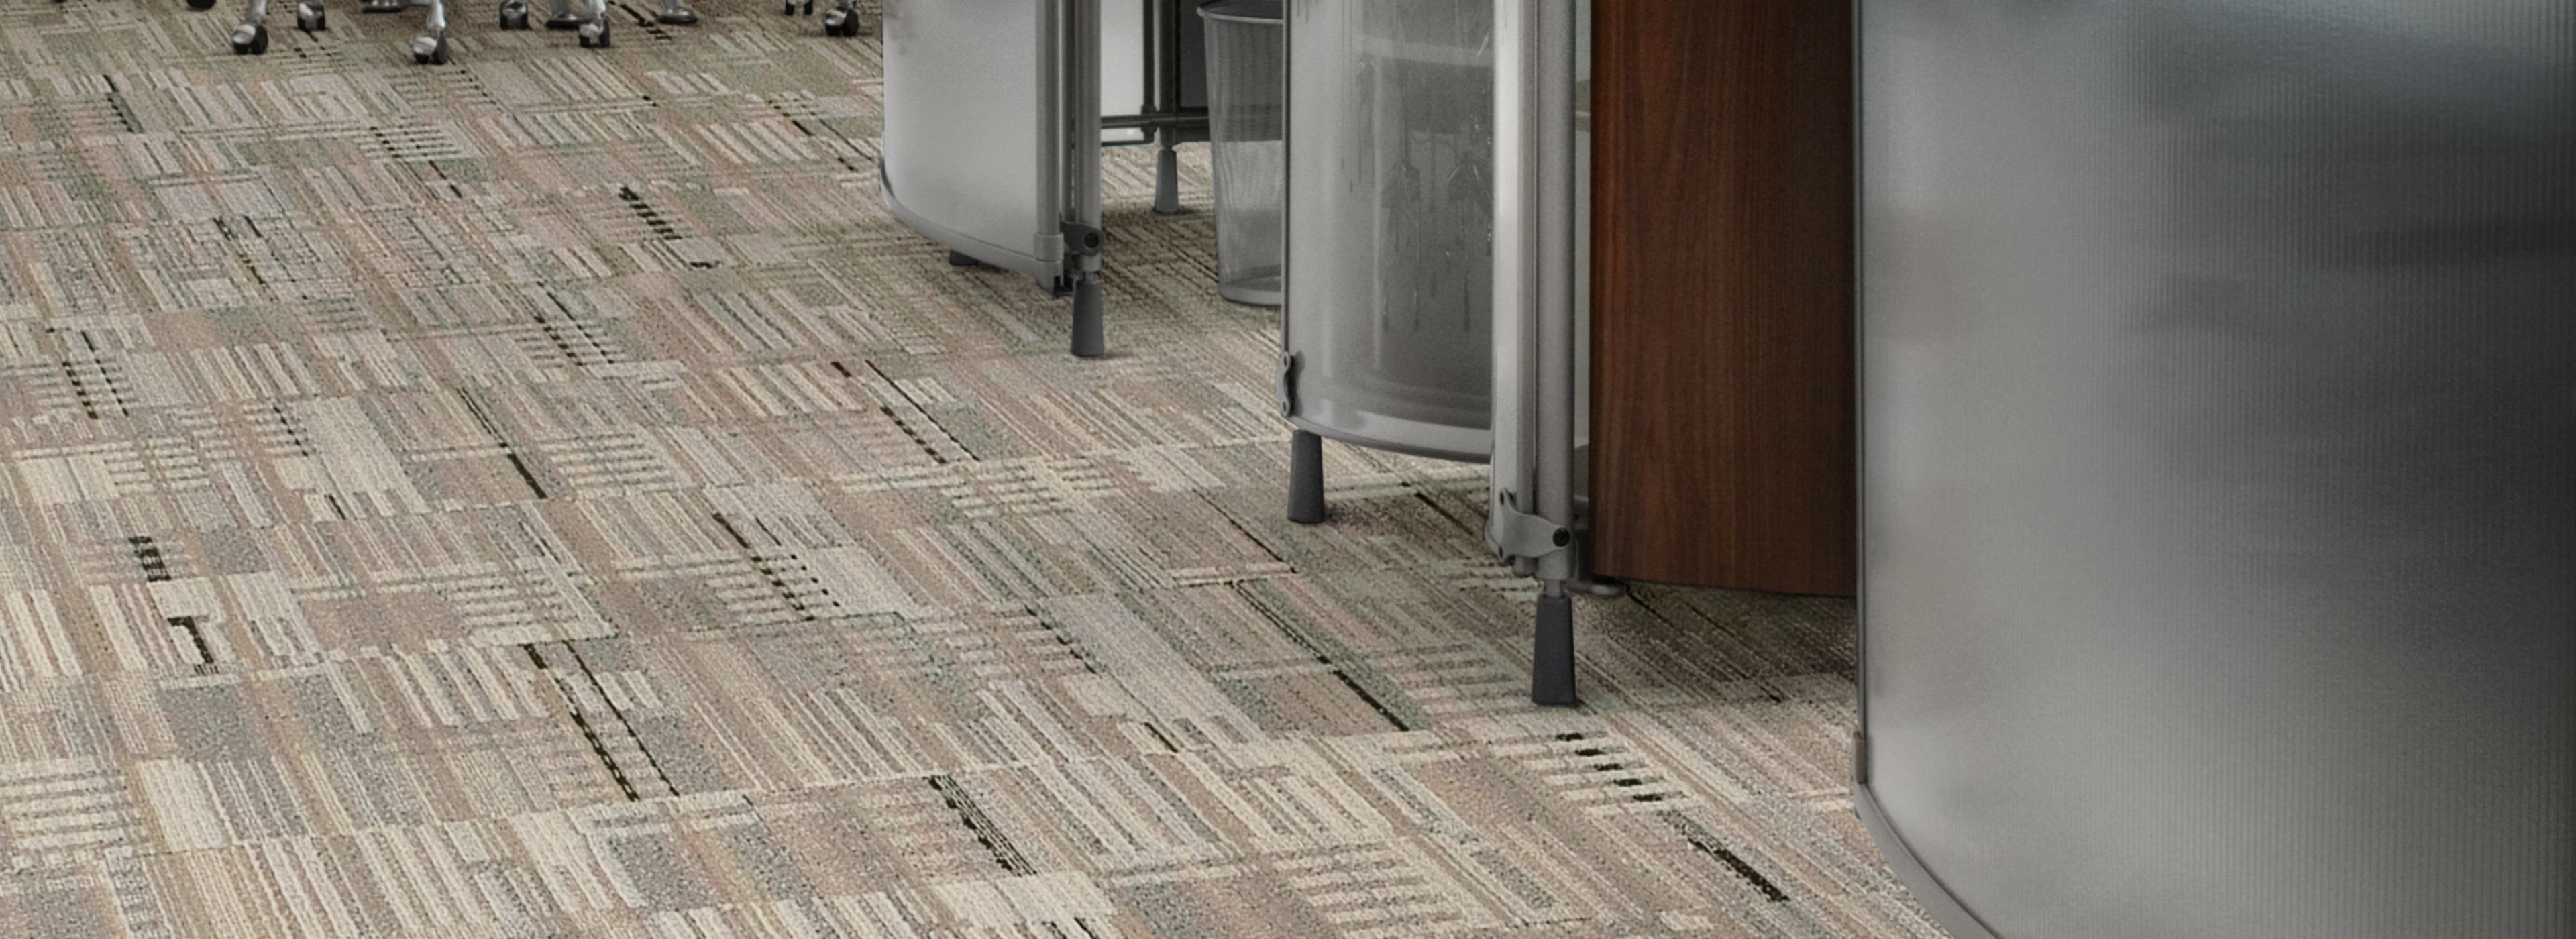 Interface Remade carpet tile in open hallway with seating area in background numéro d’image 1